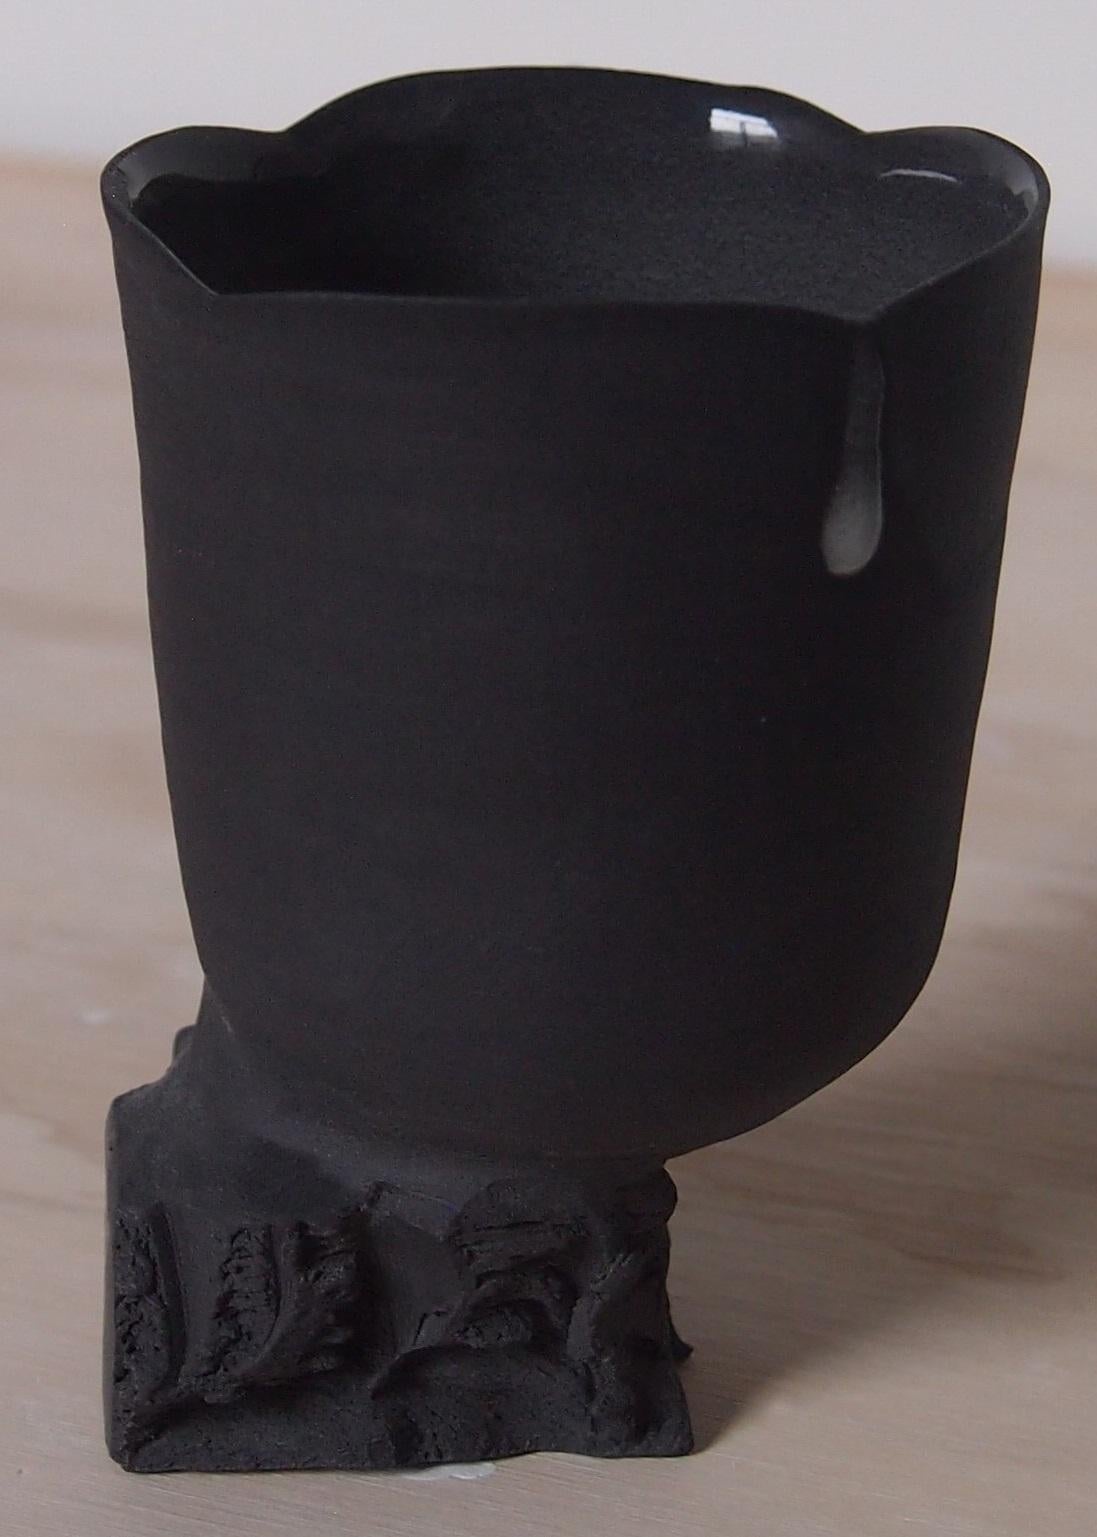 Tall Quarry Cup by Liyang Zhang
One Of A Kind.
Dimensions: D 6,5 x W 6,5 x H 10 cm.
Materials: Black porcelain. 

Made with single peice of black porcelain. The top is made on the wheel and bottom is made by tearing and chiselling.  The form reveals